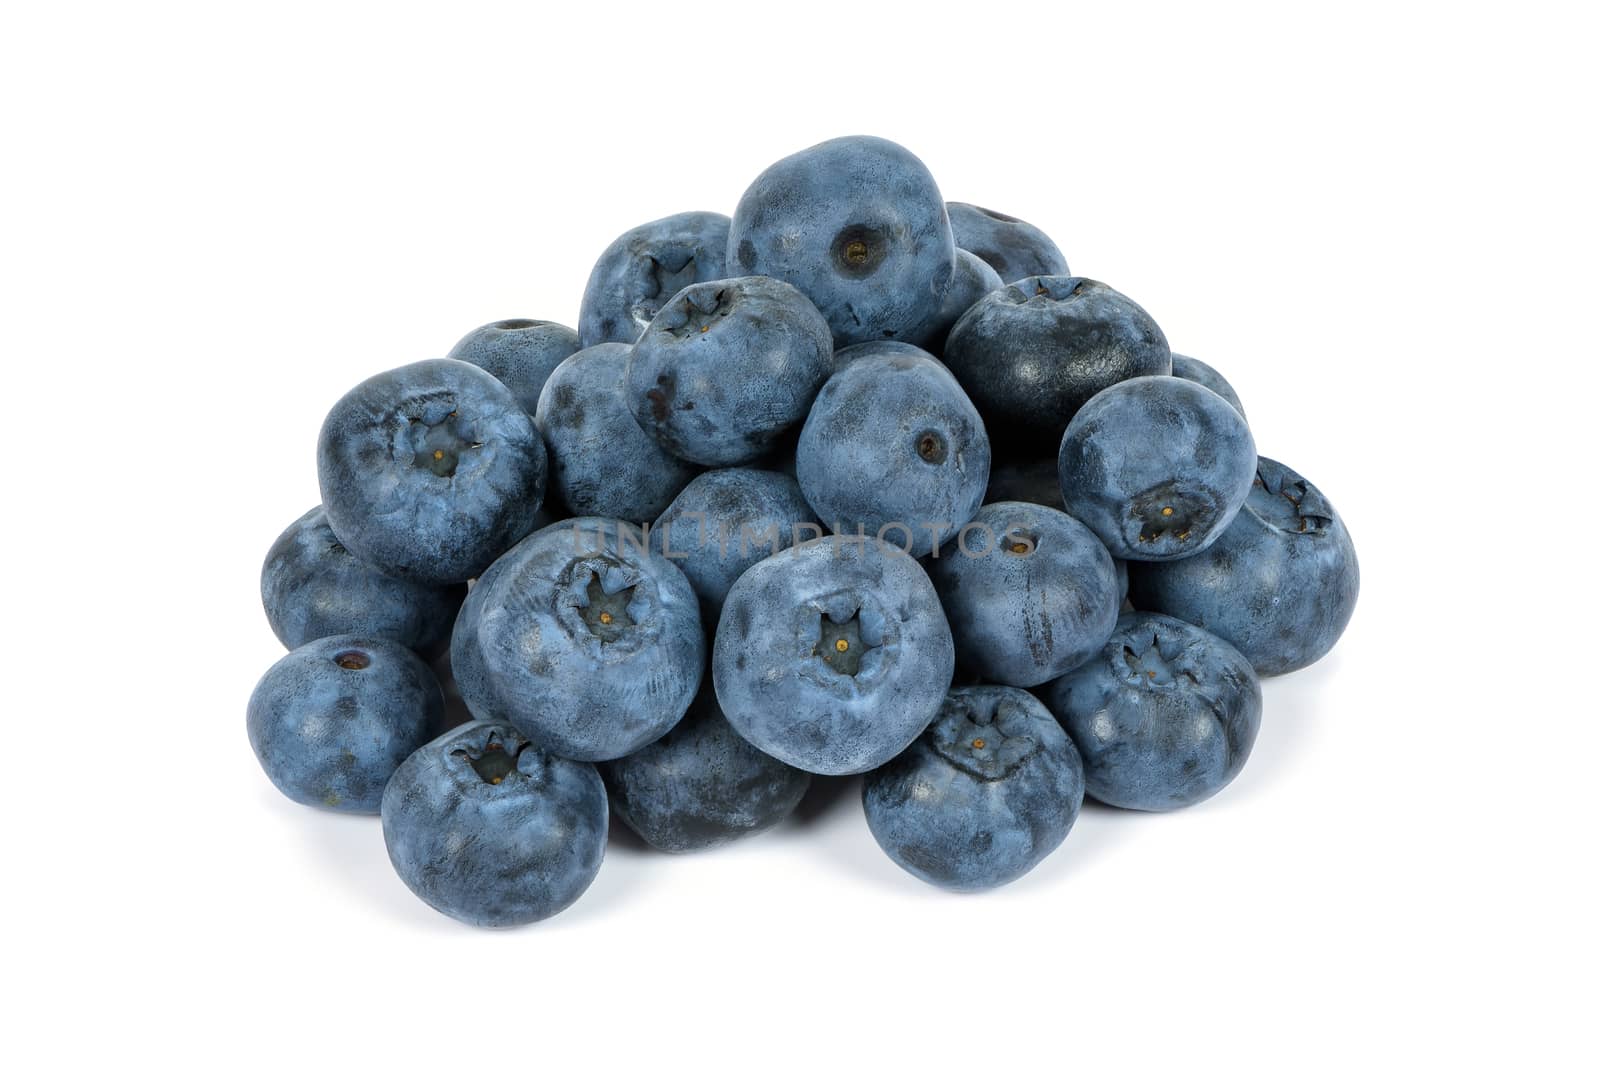 Heap of blueberries isolated on white background with clipping path